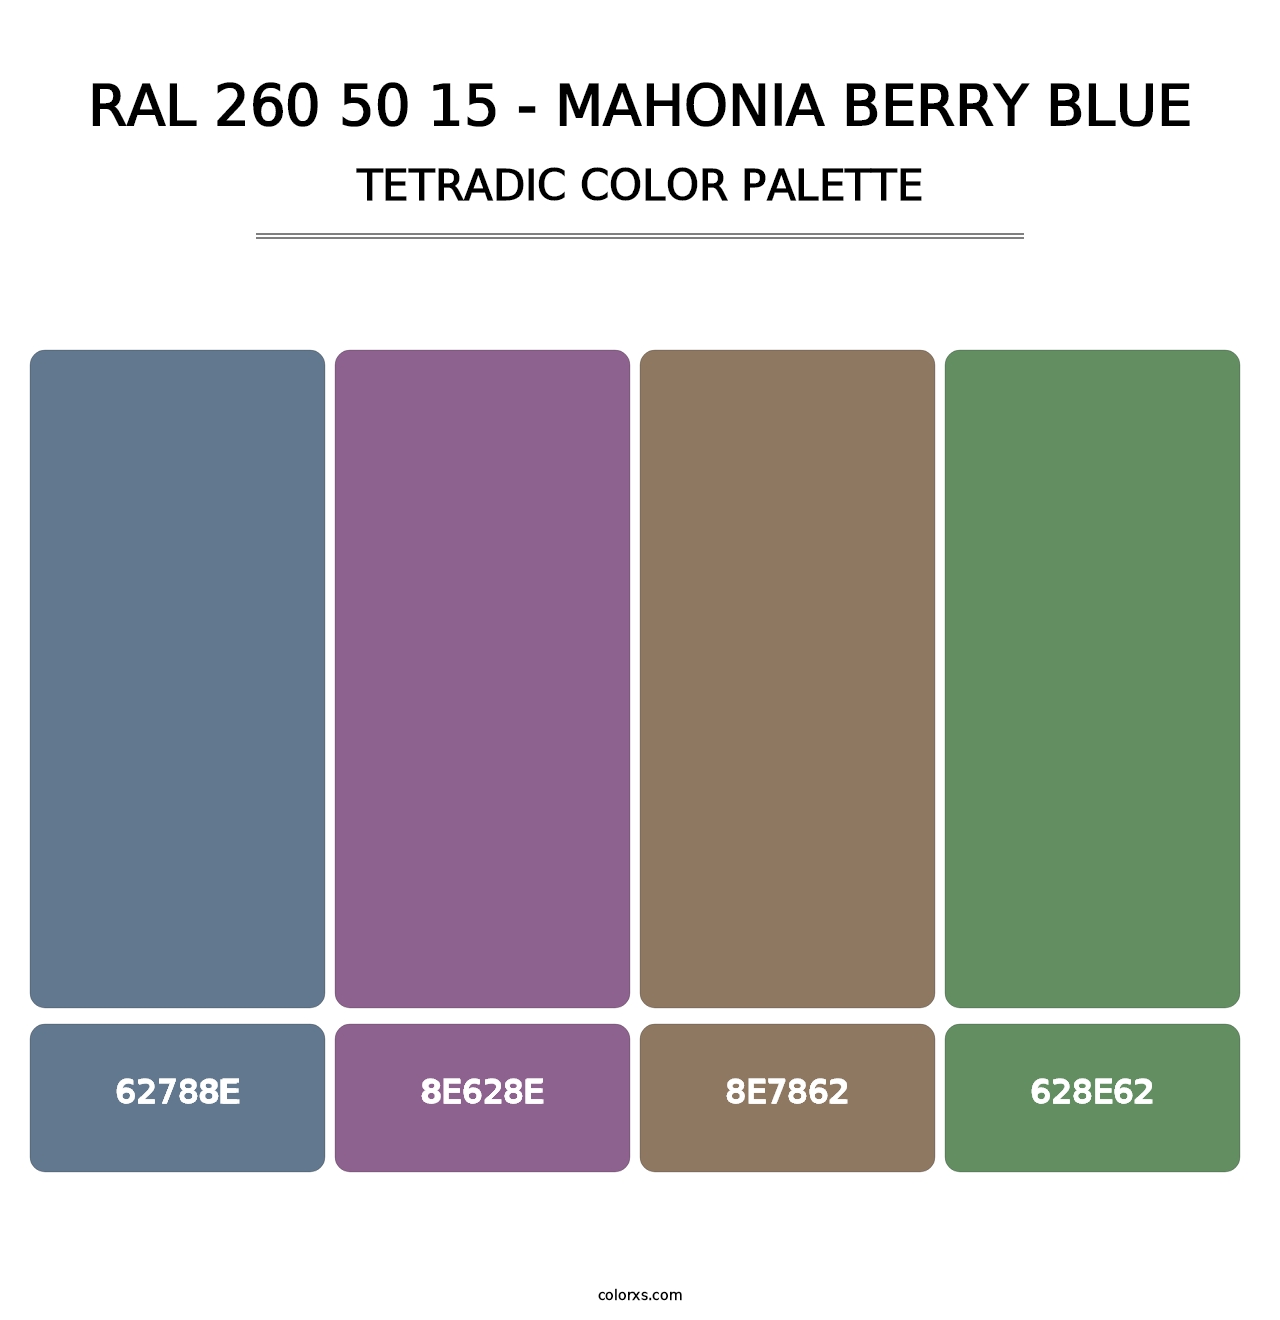 RAL 260 50 15 - Mahonia Berry Blue - Tetradic Color Palette